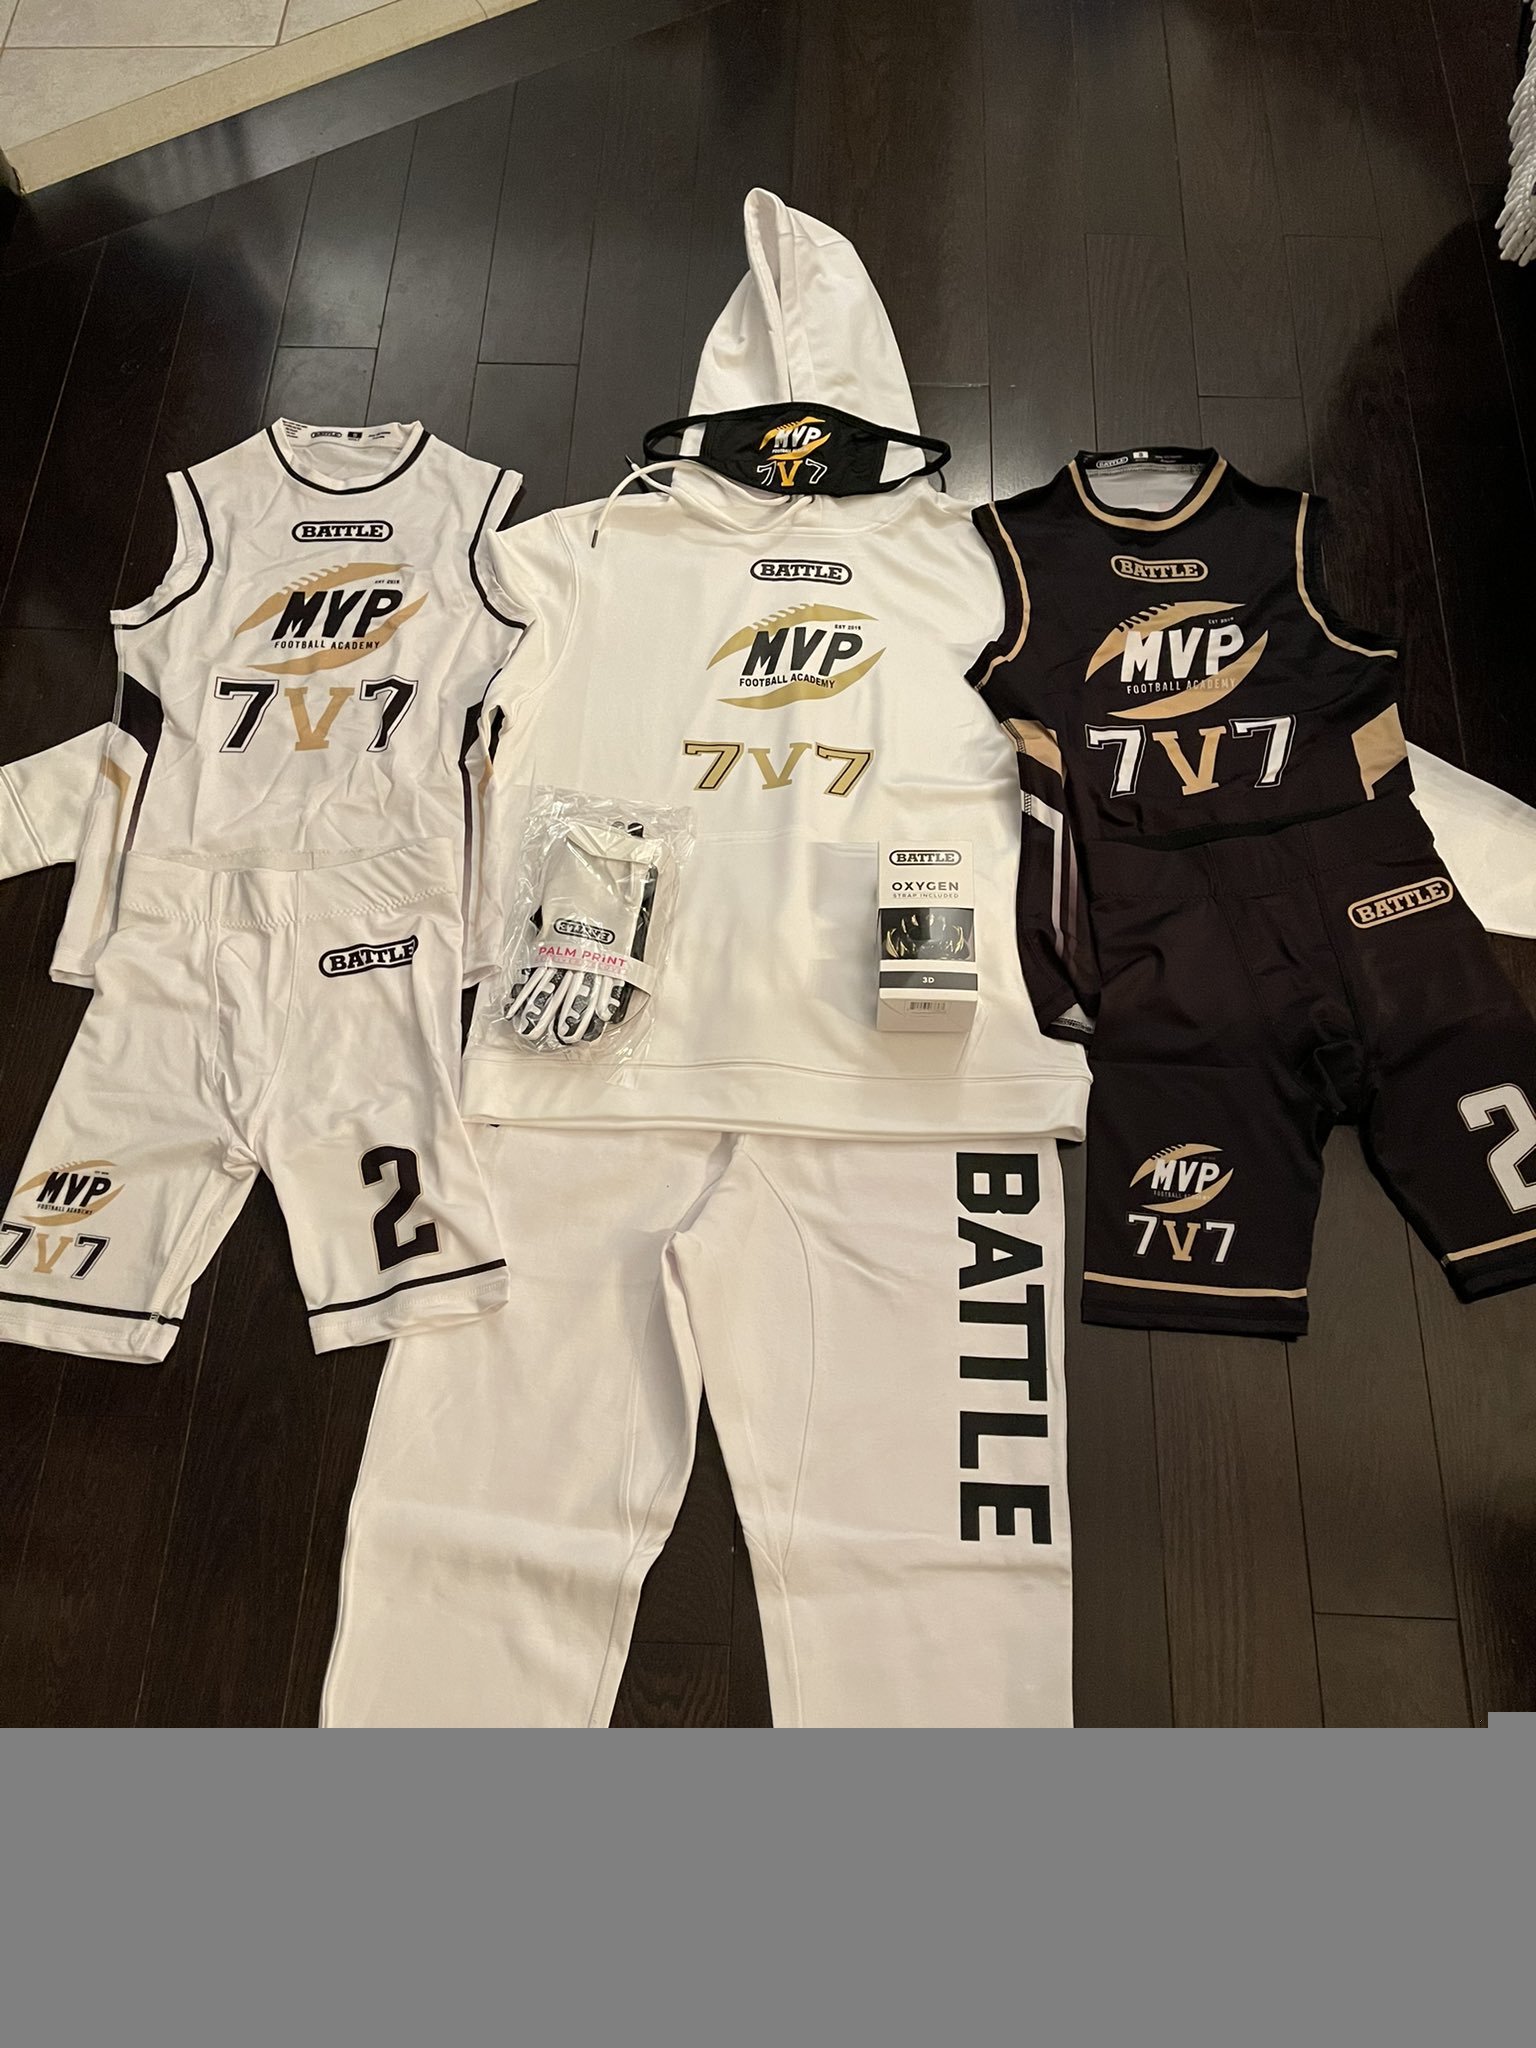 MVP FOOTBALL ACADEMY🇨🇦 on X: Excited to officially be a part of the  @Battle family for 2021!! They brought the 🔥for our uniform designs, We  are taking it to the next level